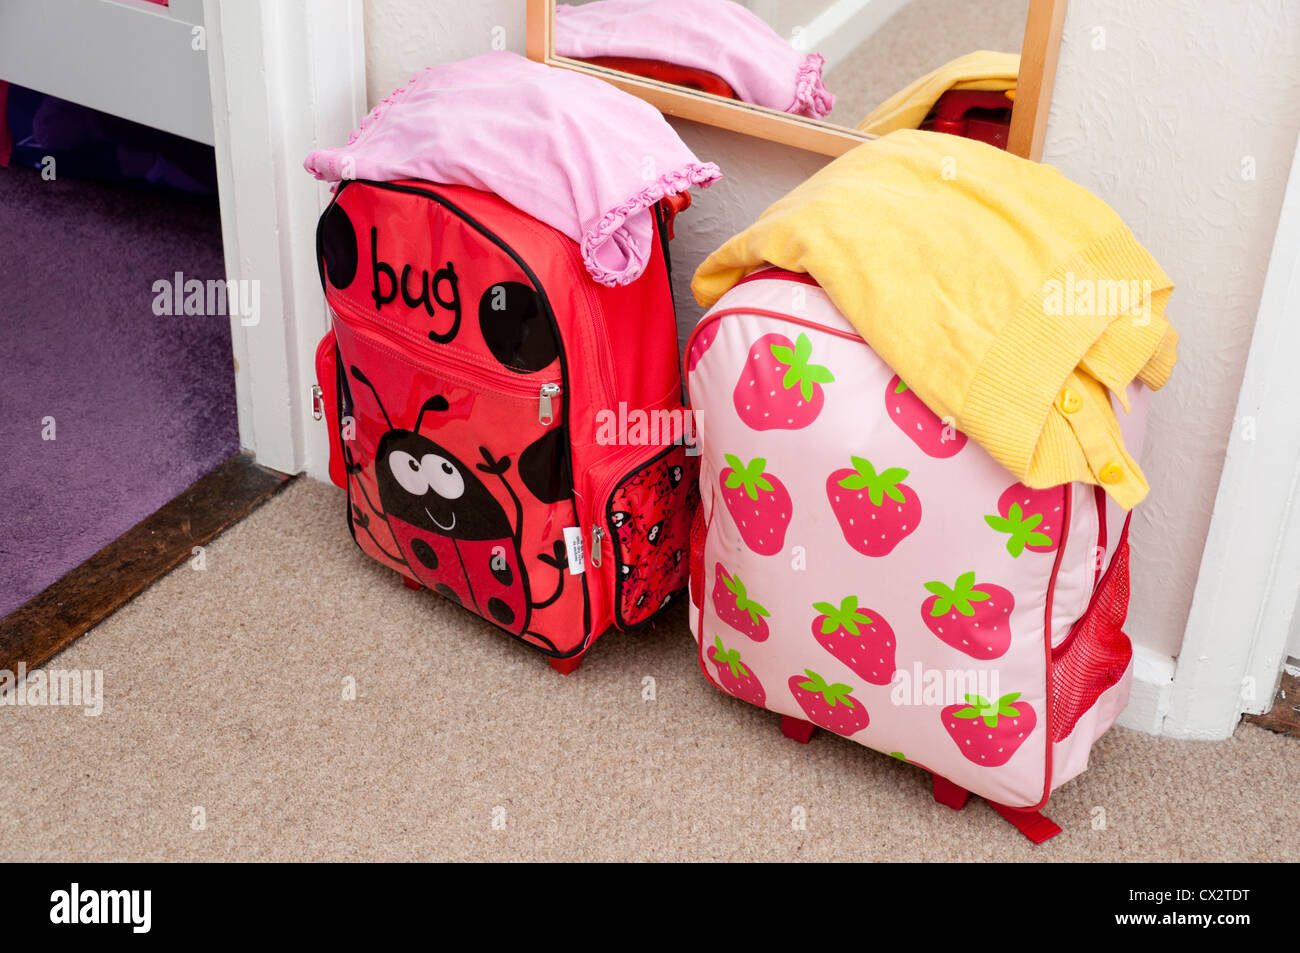 Children's suitcases packed for a holiday sleepover. Stock Photo